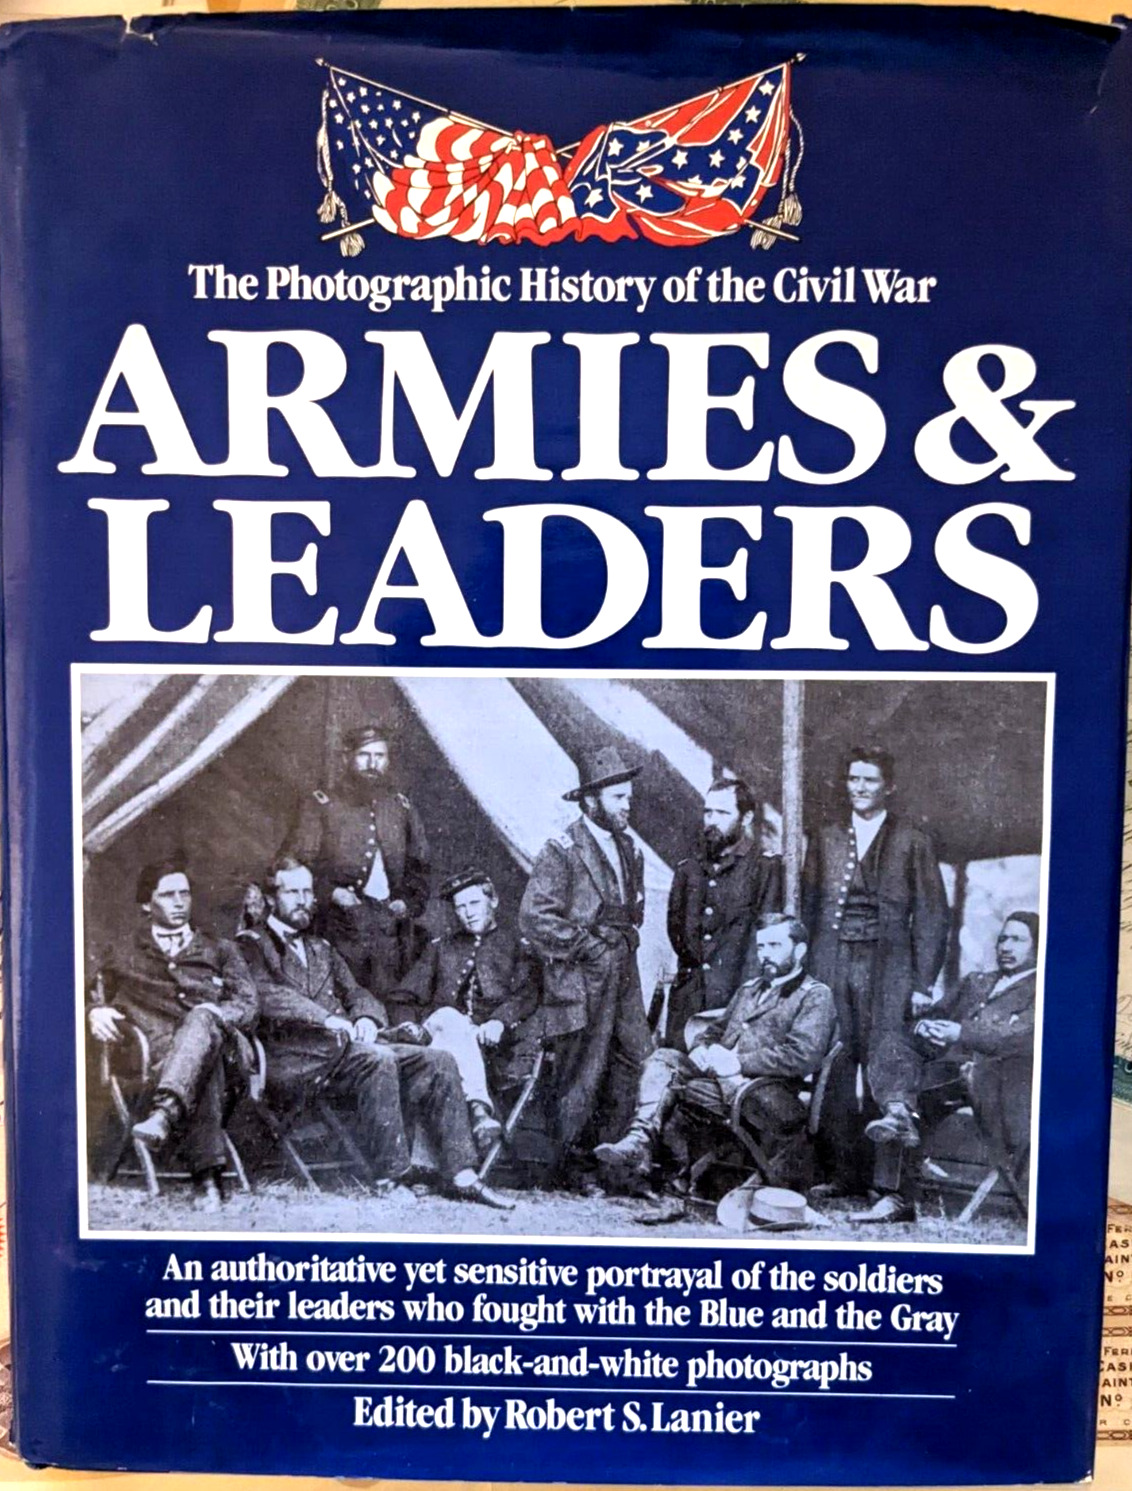 ARMIES & LEADERS, Fine, 1983, Photographic History of the Civil War, Collectable